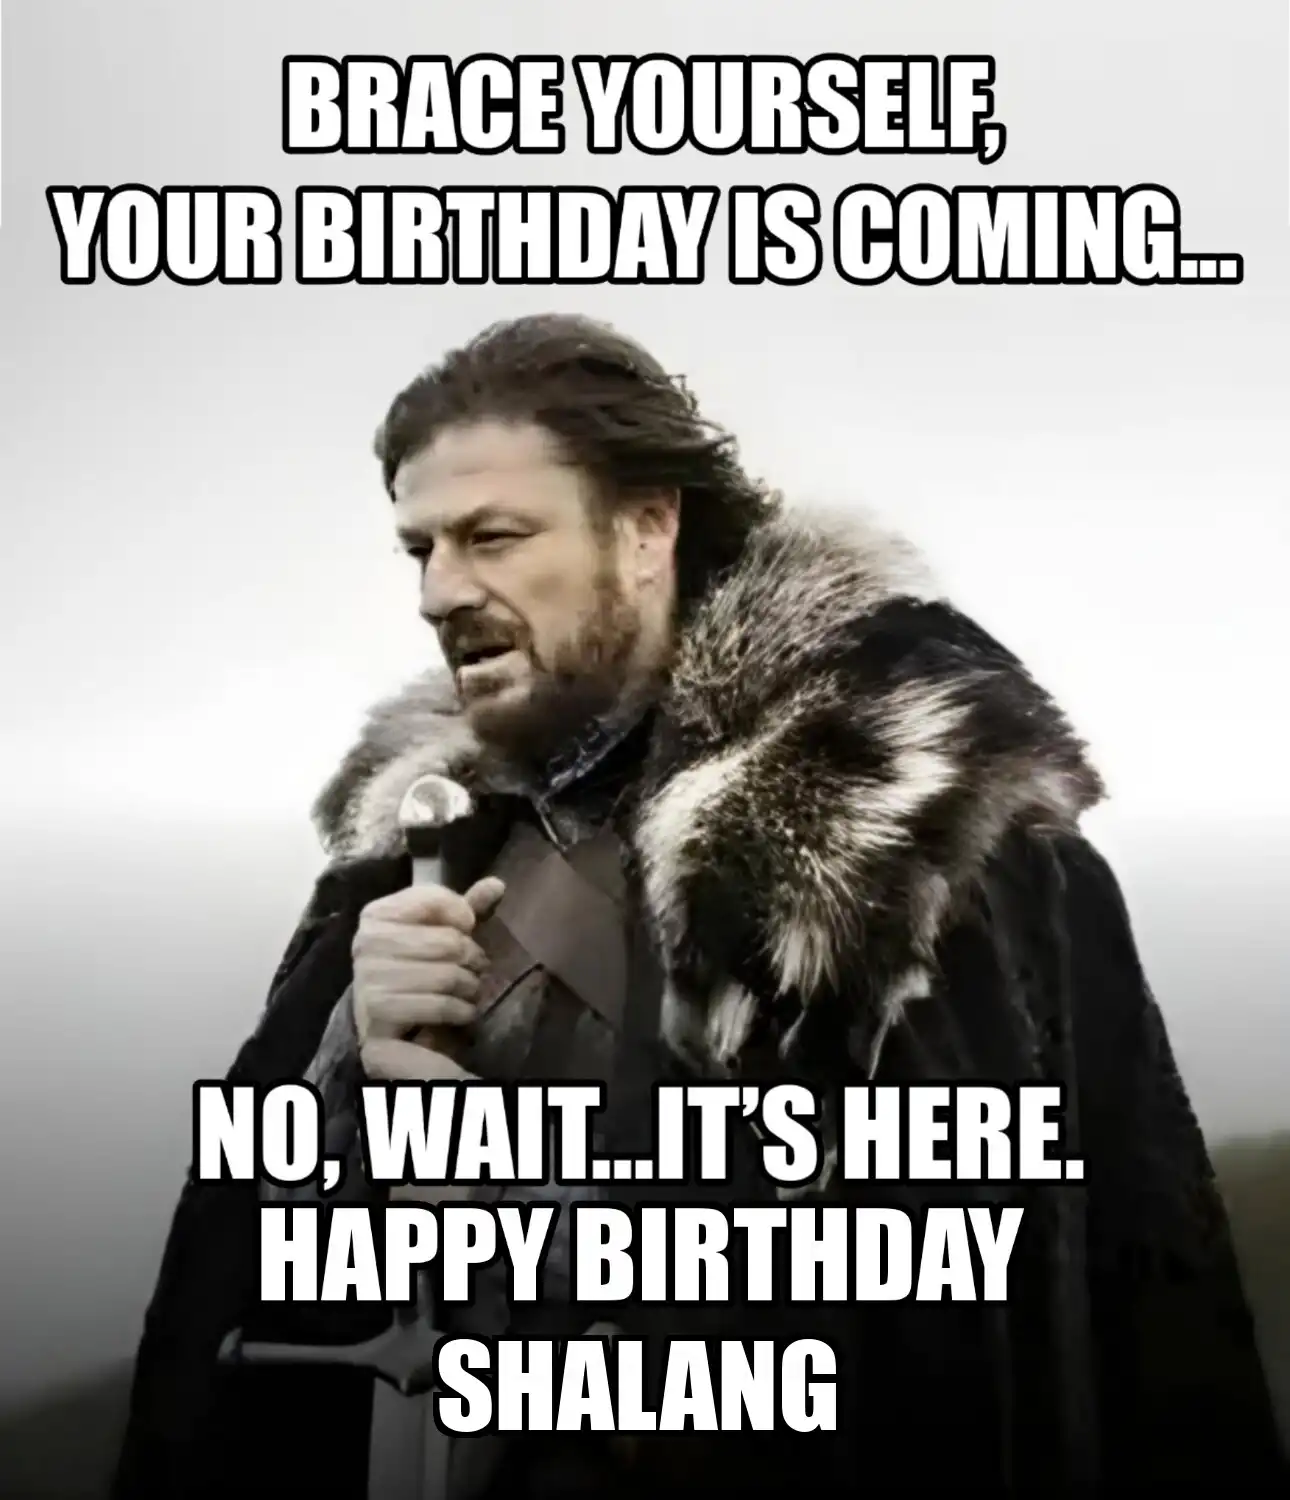 Happy Birthday Shalang Brace Yourself Your Birthday Is Coming Meme